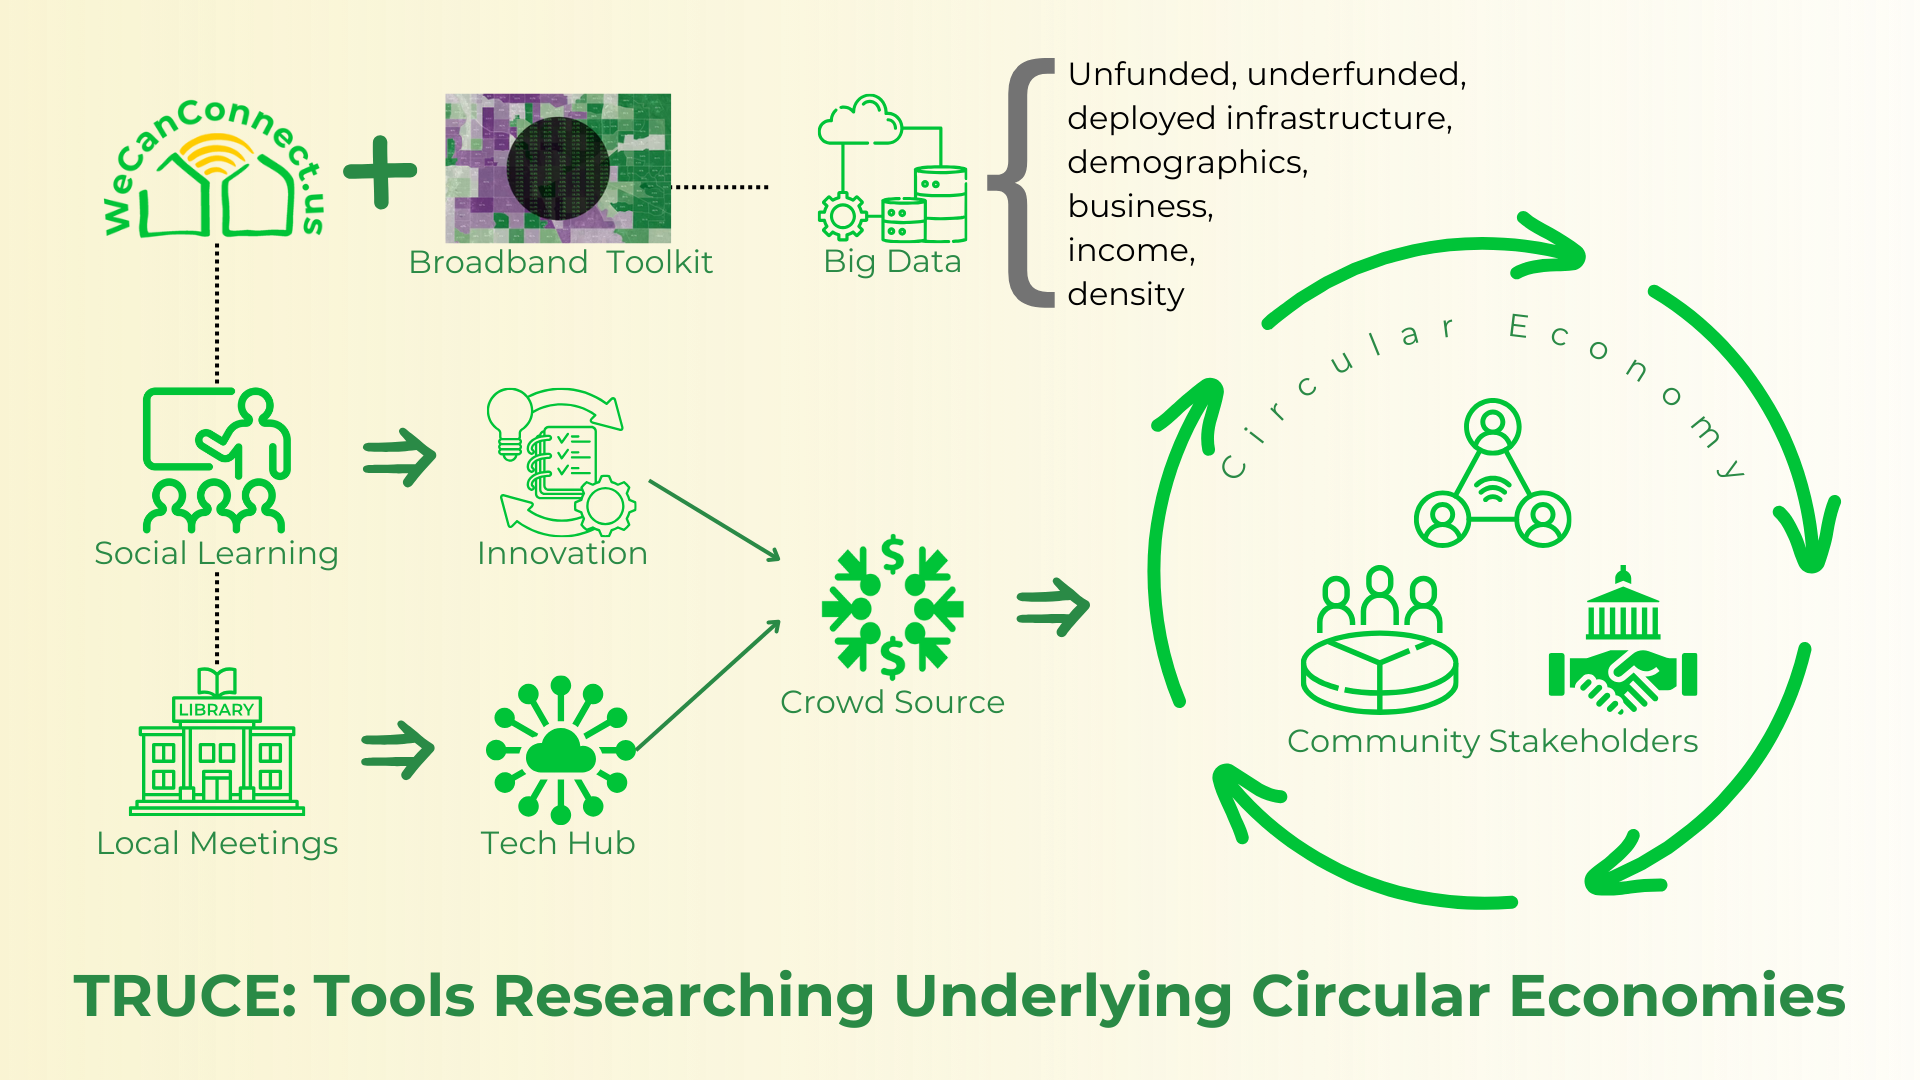 TRUCE: Tools Researching Underlying Circular Economies